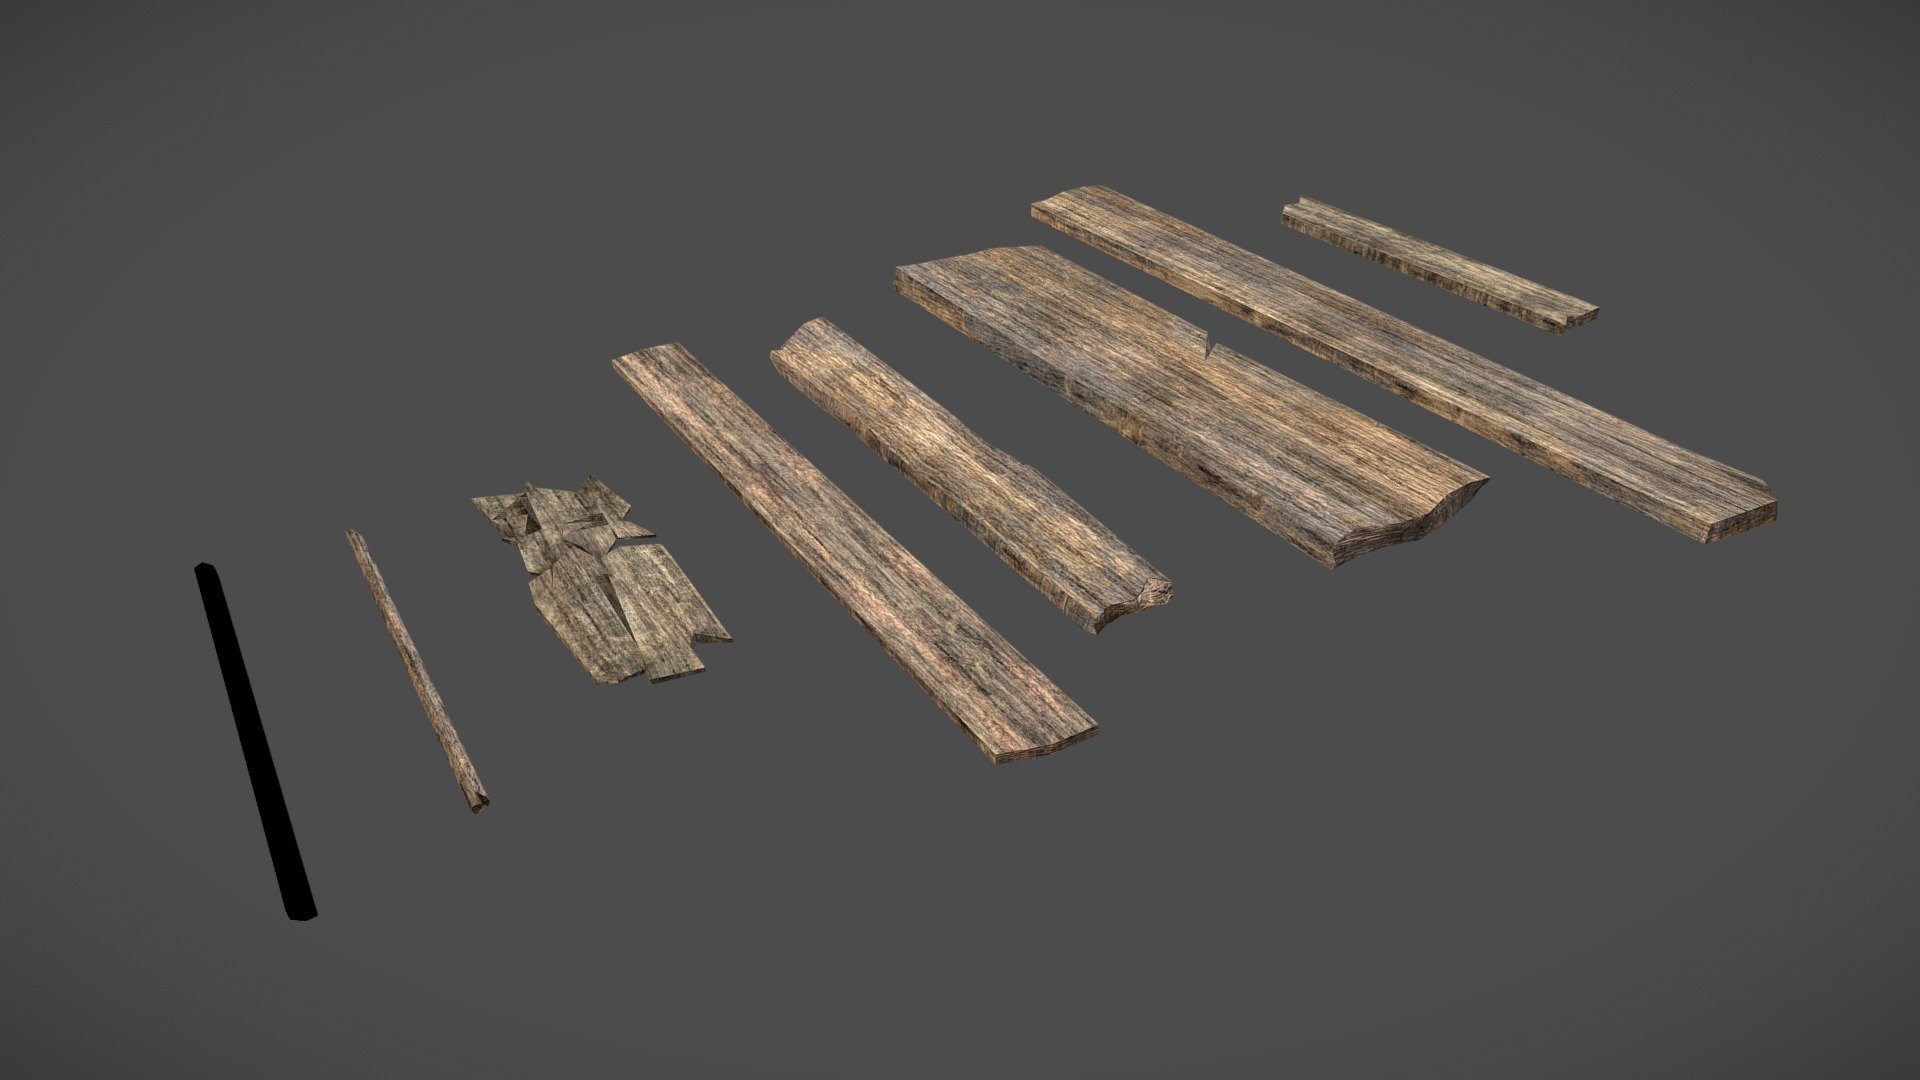 Some simple stylized wooden planks and debris, with varying damage. Comes with 2K Textures. 

Maya file included for convenience and an FBX. 

Something to possibly scatter in your scenes to fill in the empty areas.

Relatively low-poly models, with some bevels applied. UVed 3d model